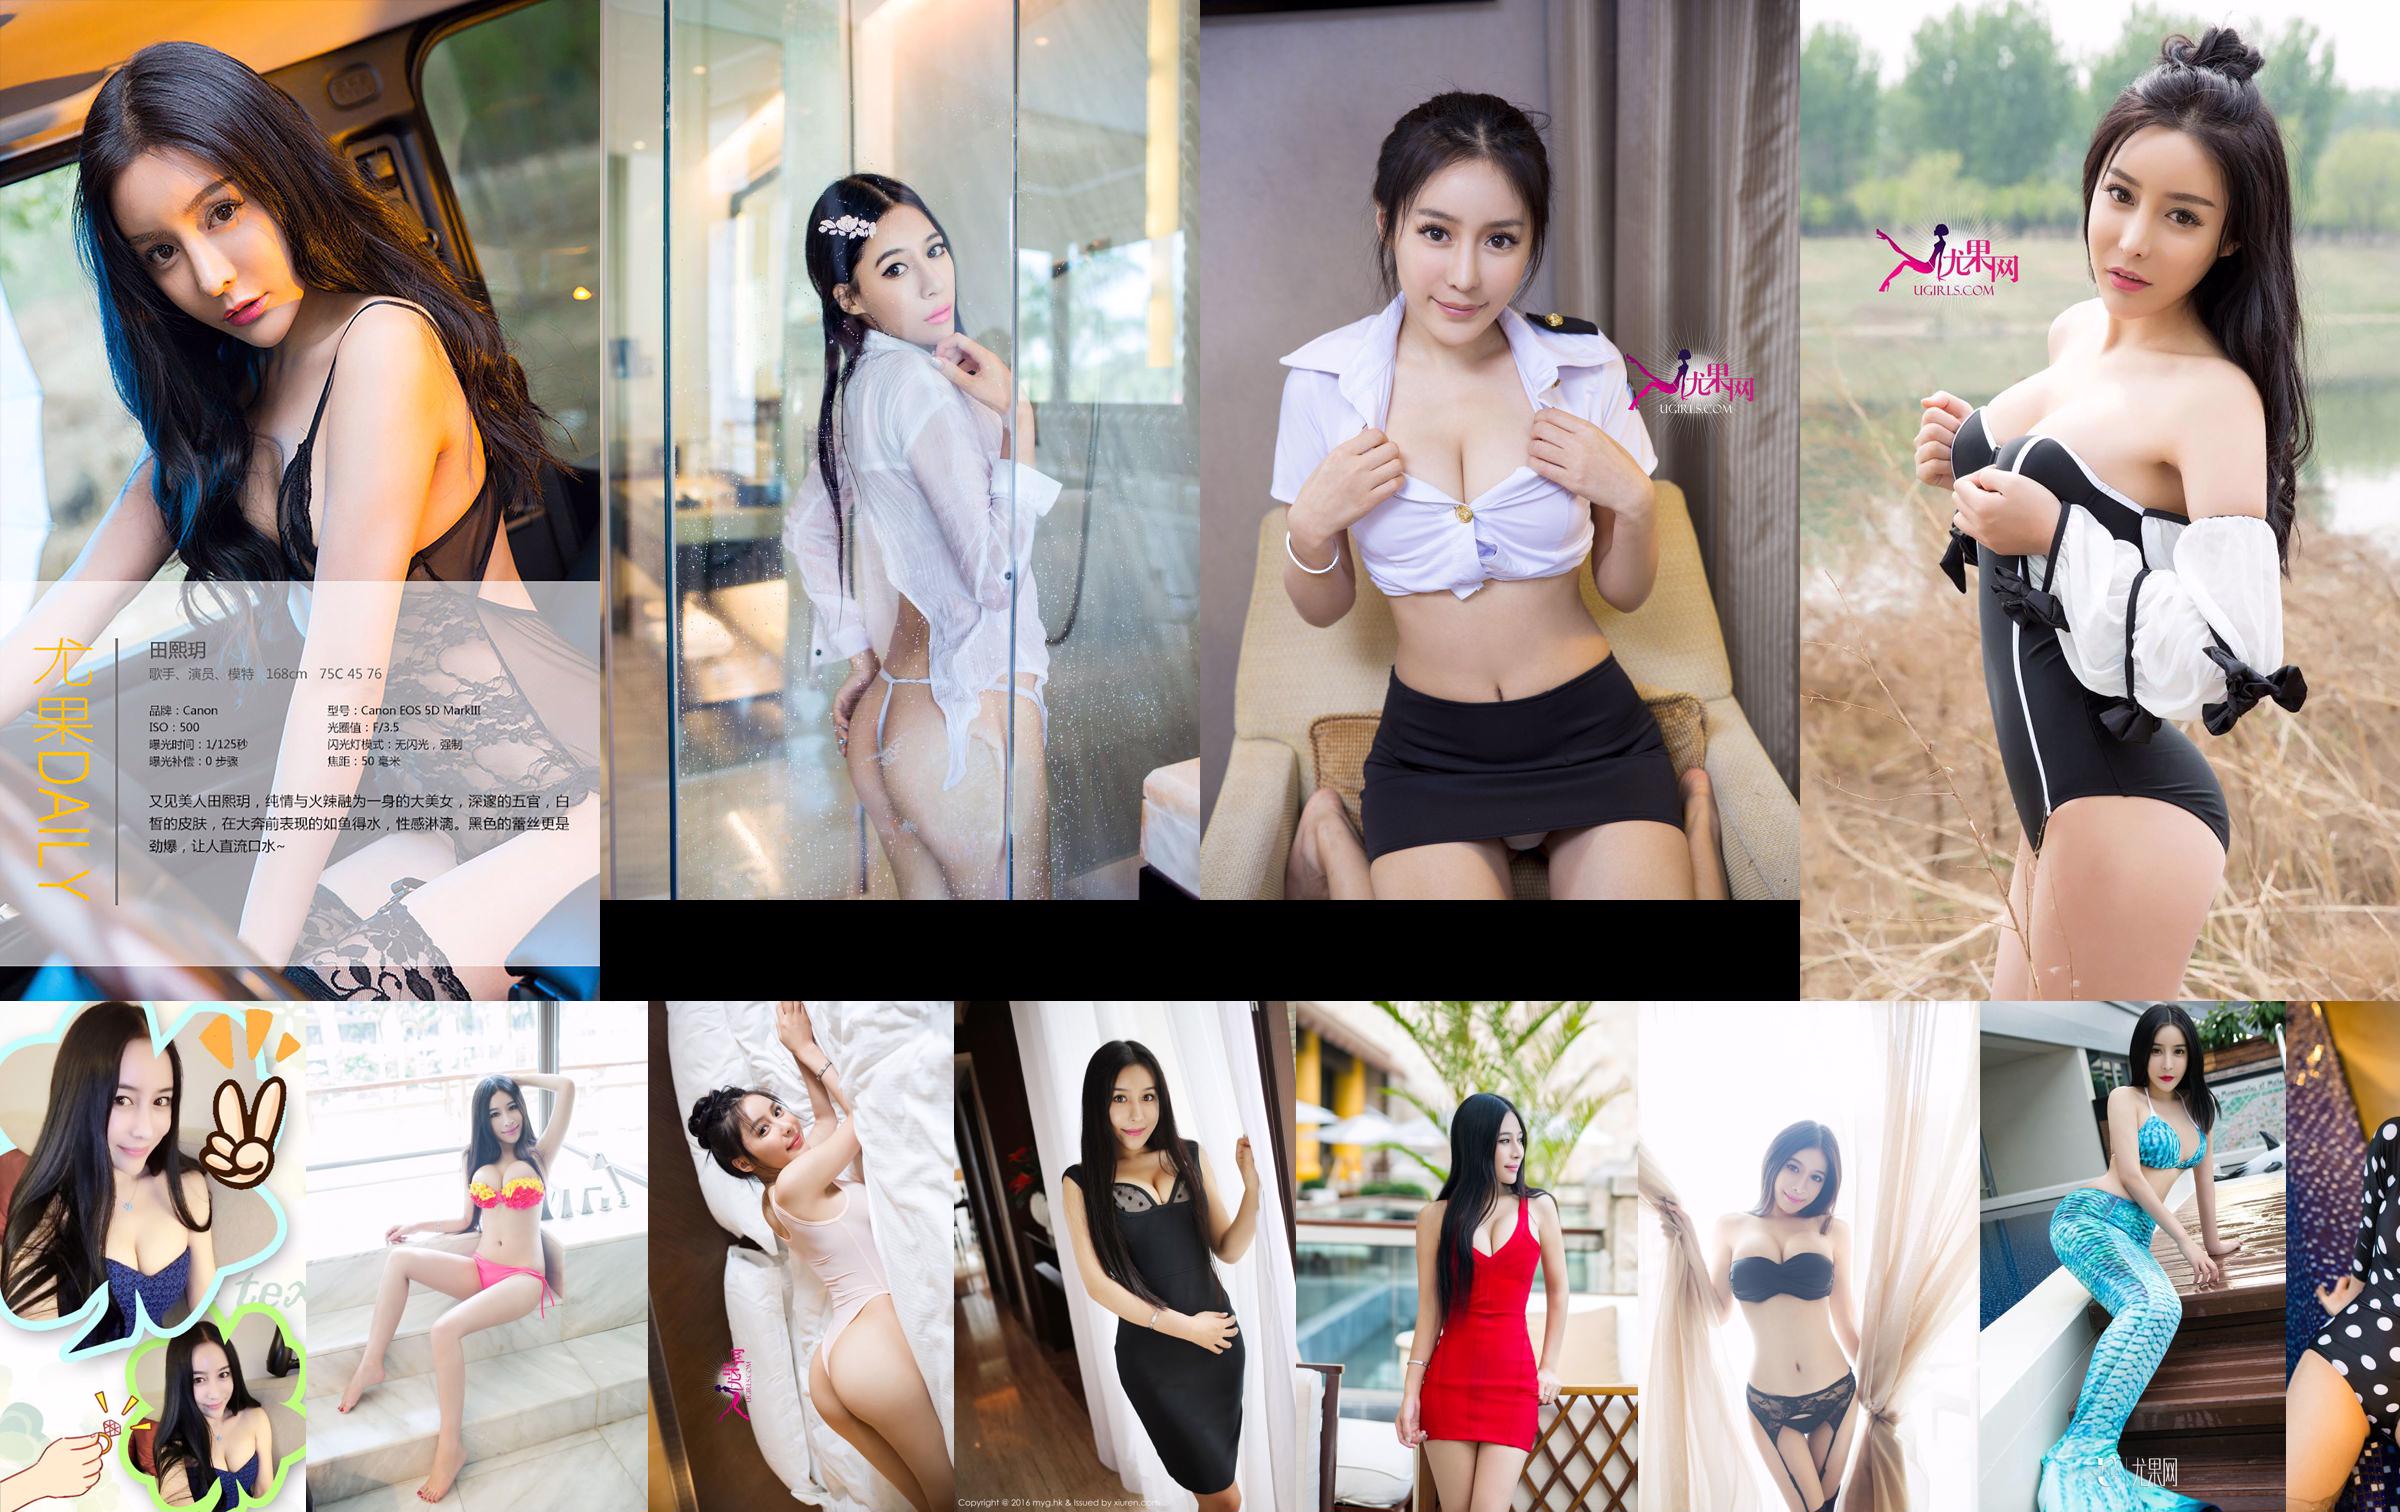 Tian Xinna Angel "Sexy beautiful buttocks, exquisite looks, perfect figure S-curve" [美媛馆MyGirl] Vol.190 No.535859 Page 1